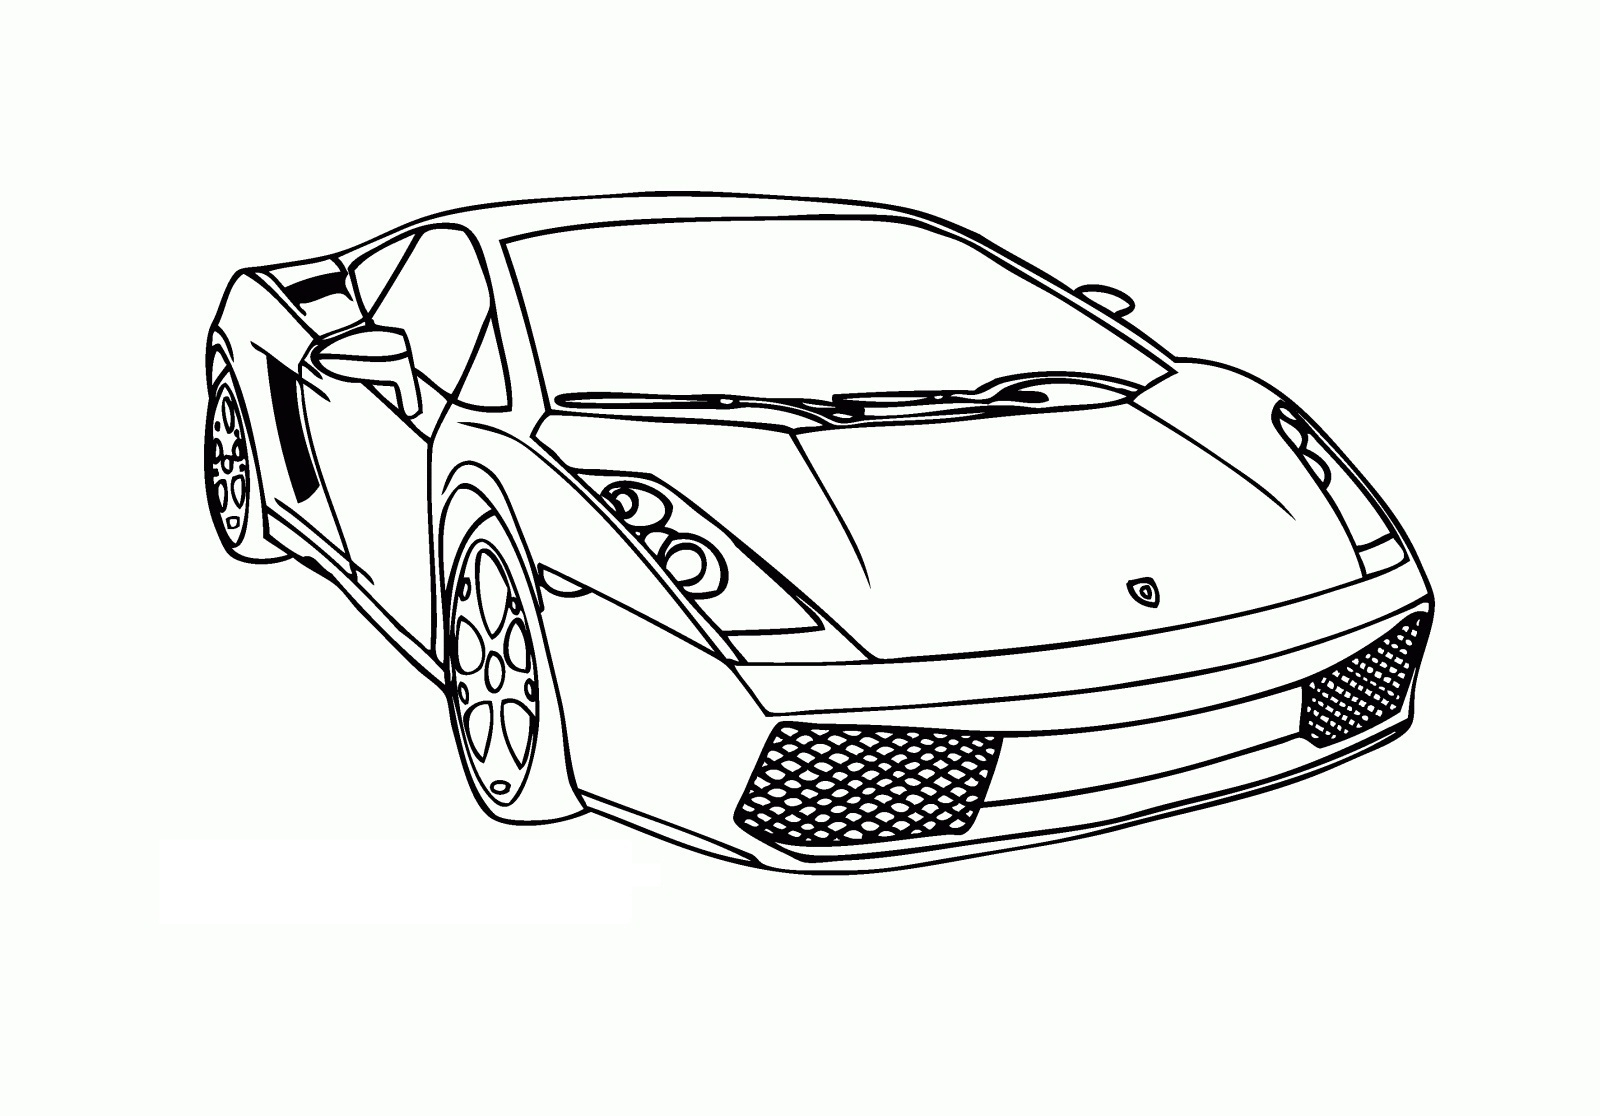 Coloring Page Of A Race Car Coloring Pages For Kids Cars With Coloring Pages Image Christmas